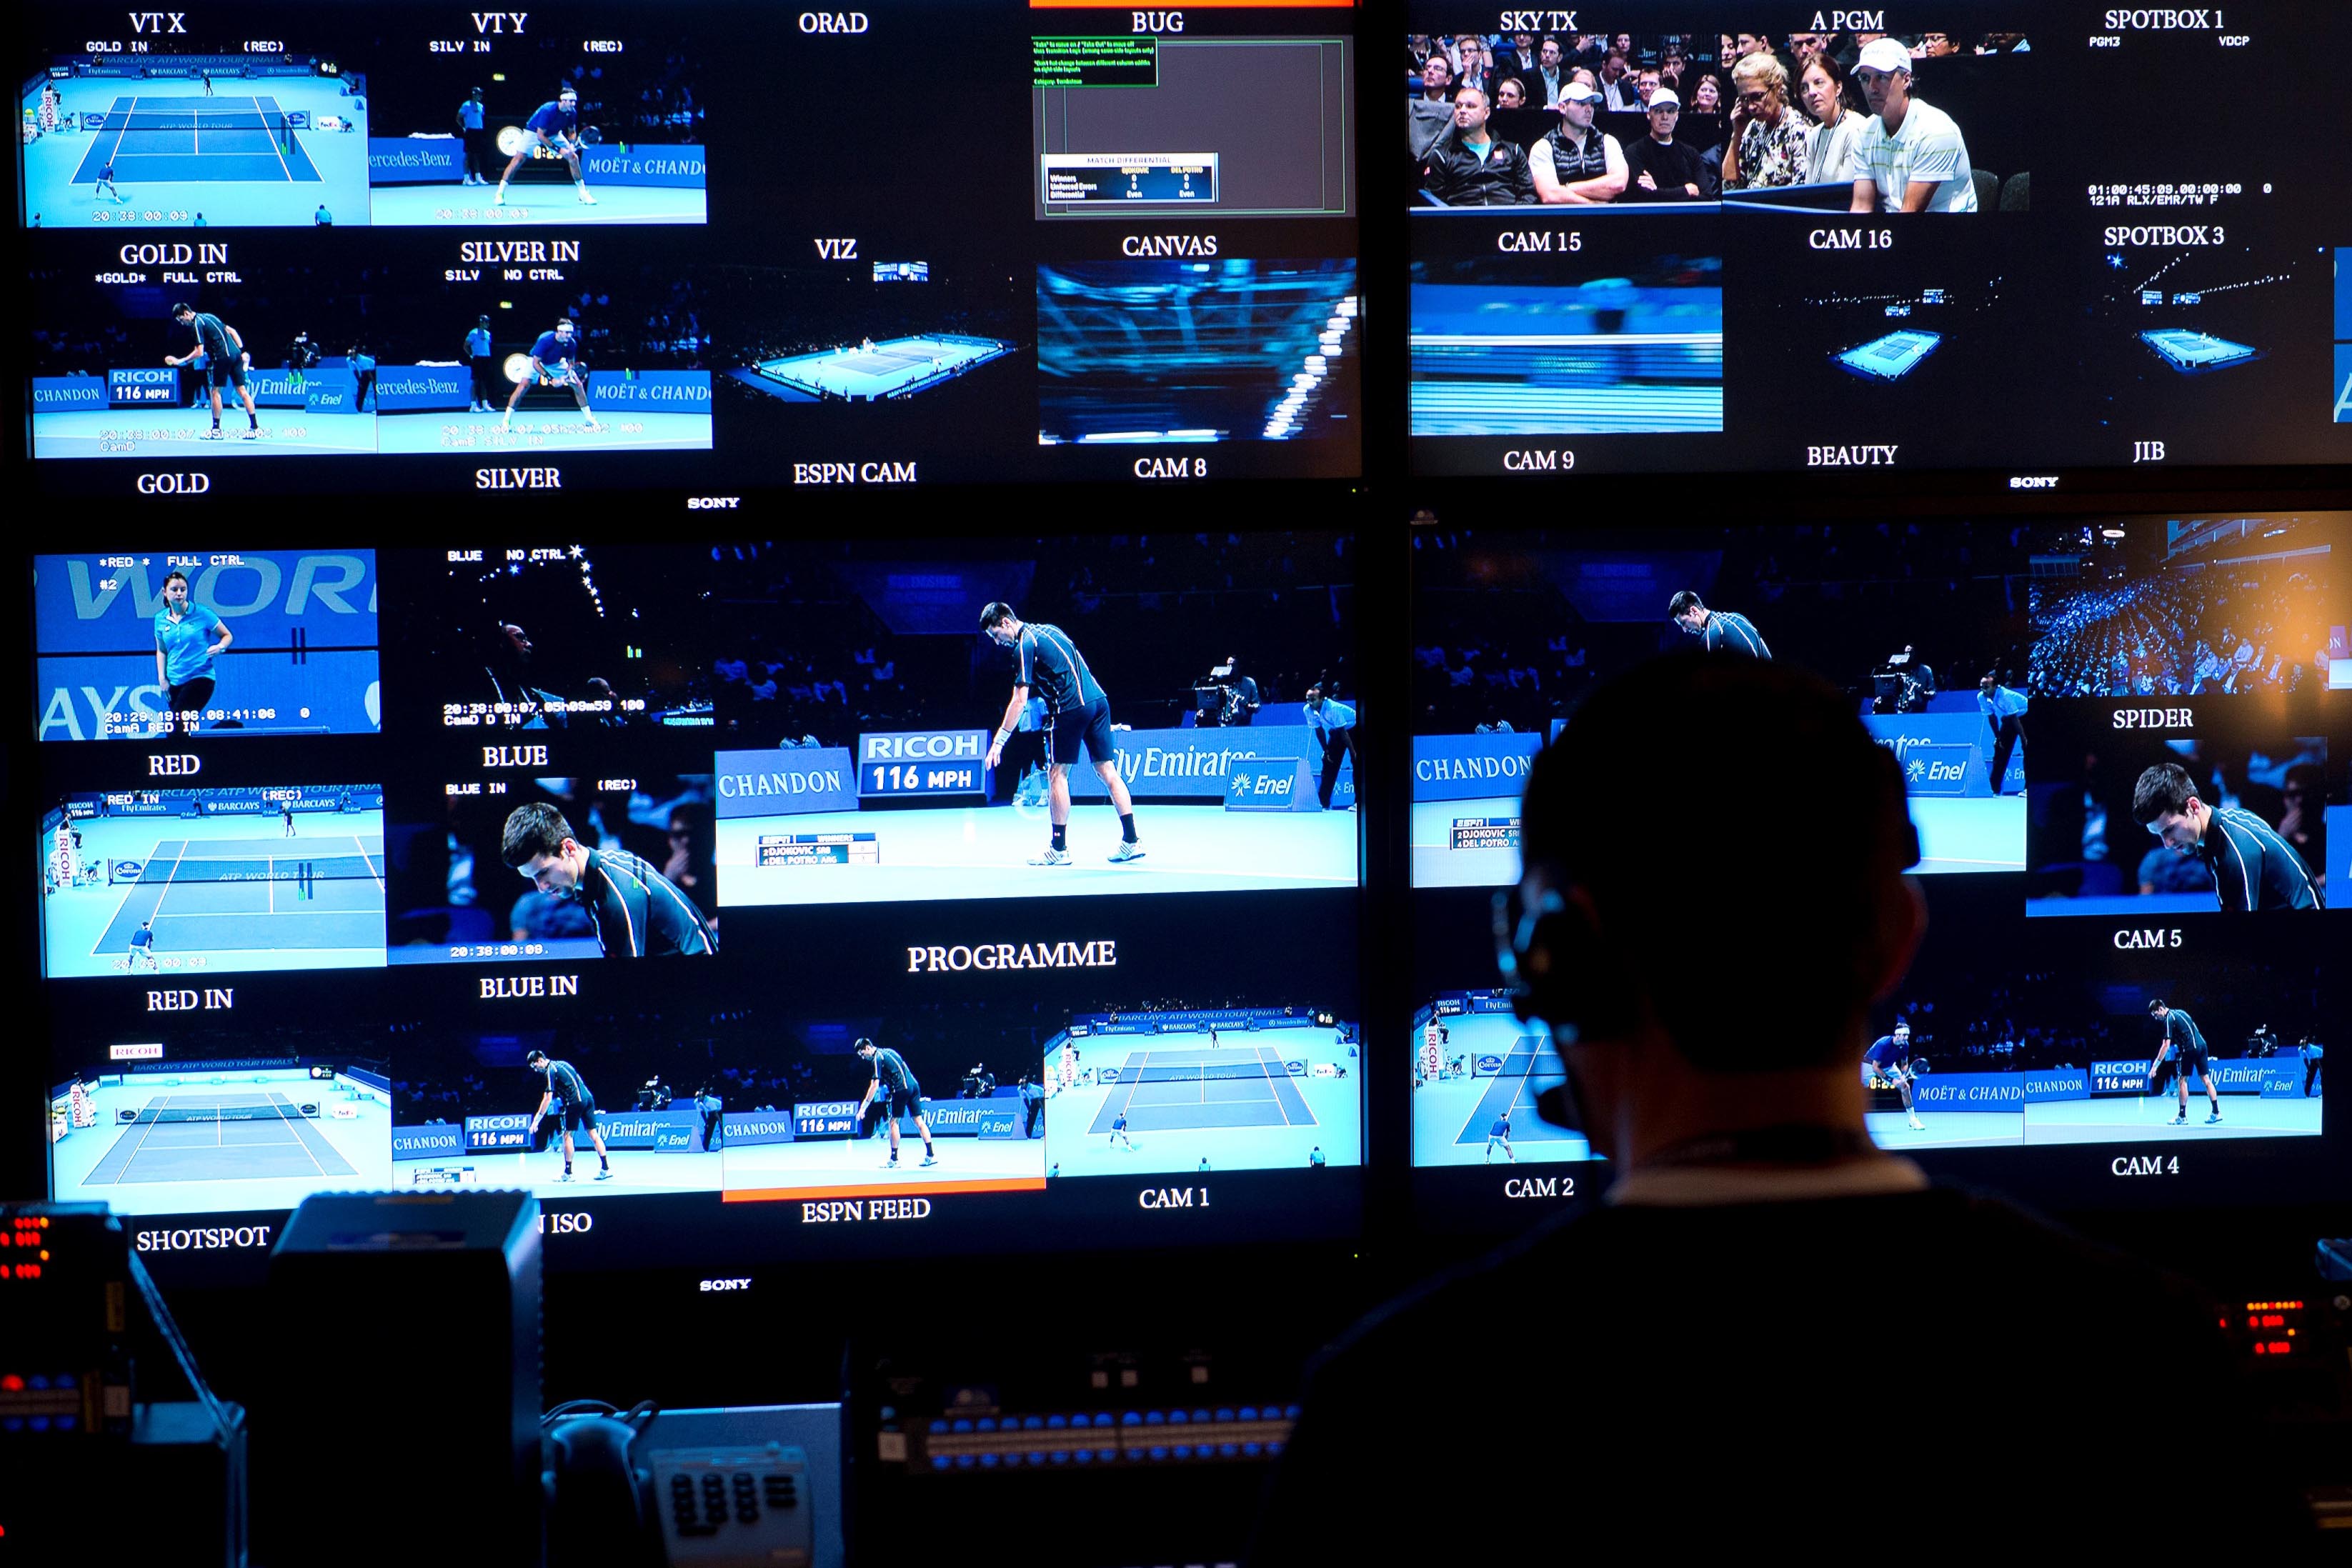 ATP Media aims to smash highlights with WSC Sports AI video technology